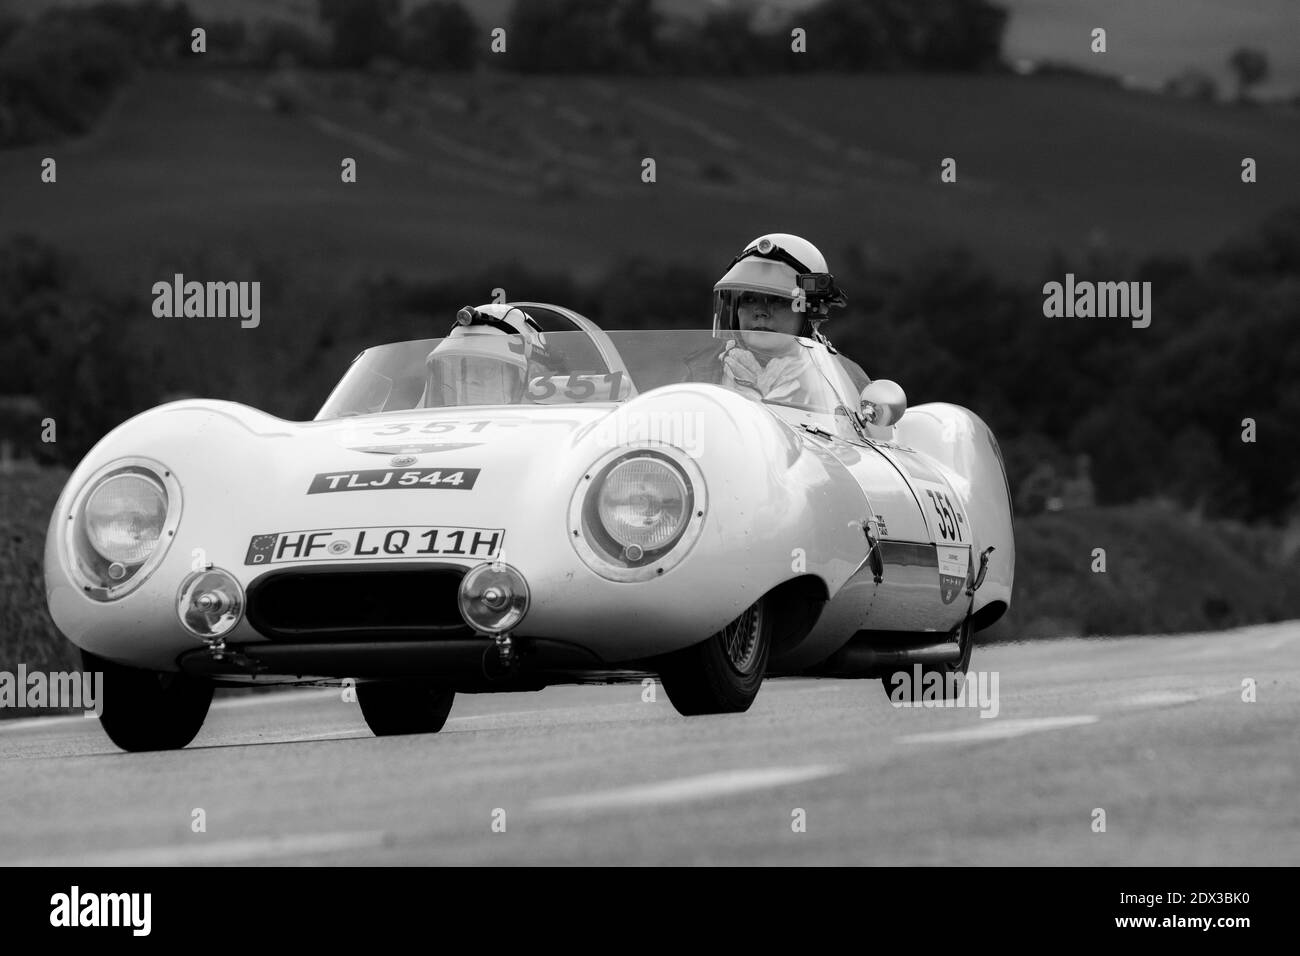 CAGLI , ITALY - OTT 24 - 2020 : LOTUS ELEVEN COVENTRY CLIMAX 1100 1956 on an old racing car in rally Mille Miglia 2020 the famous italian historical r Stock Photo